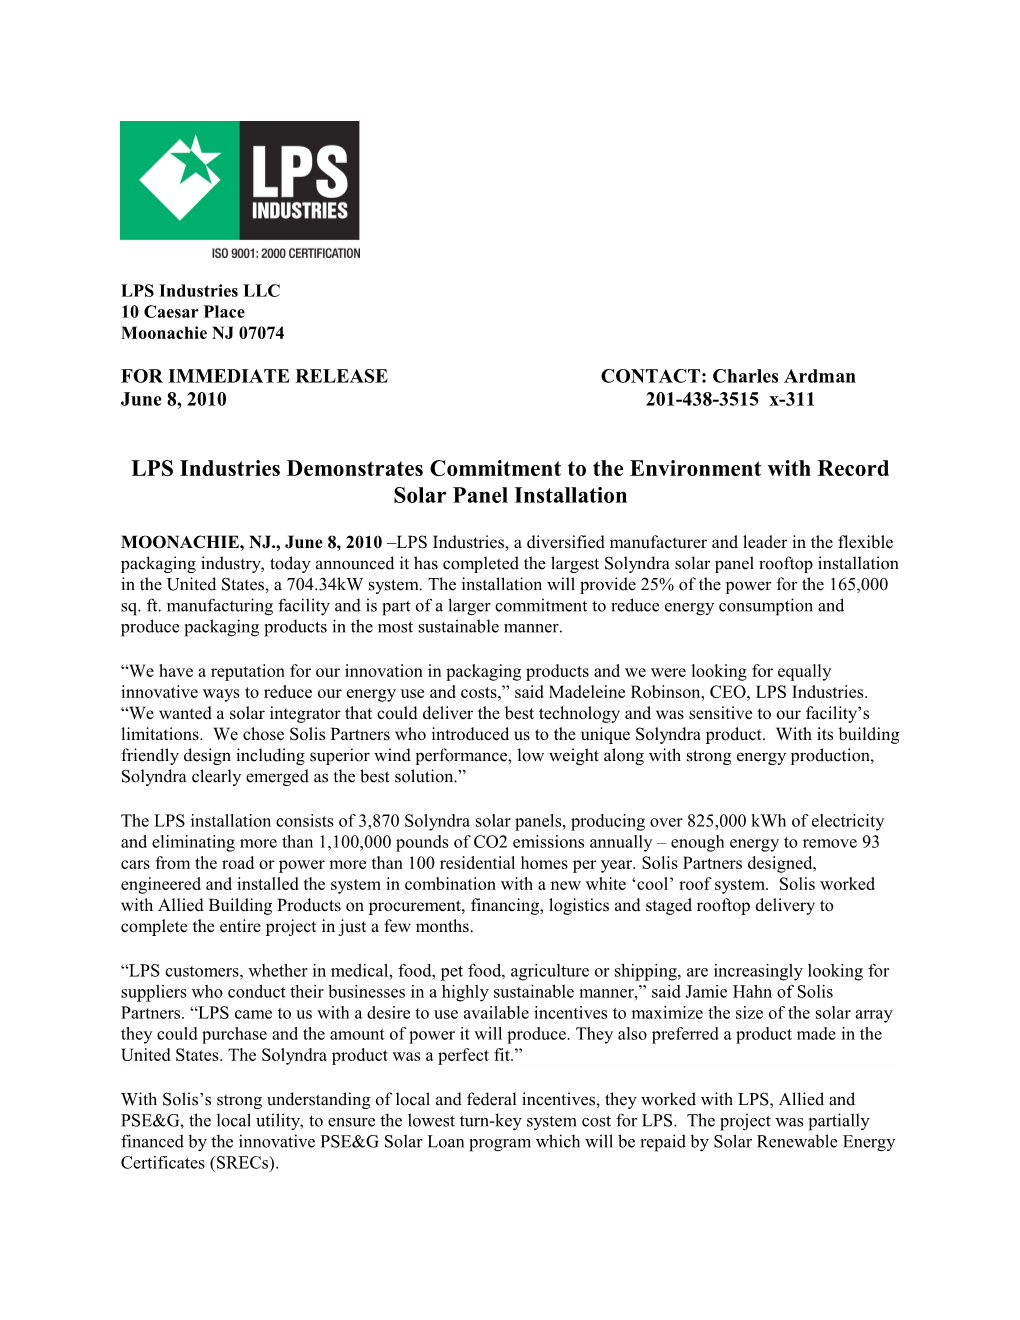 LPS Industries Demonstrates Commitment to the Environment with Record